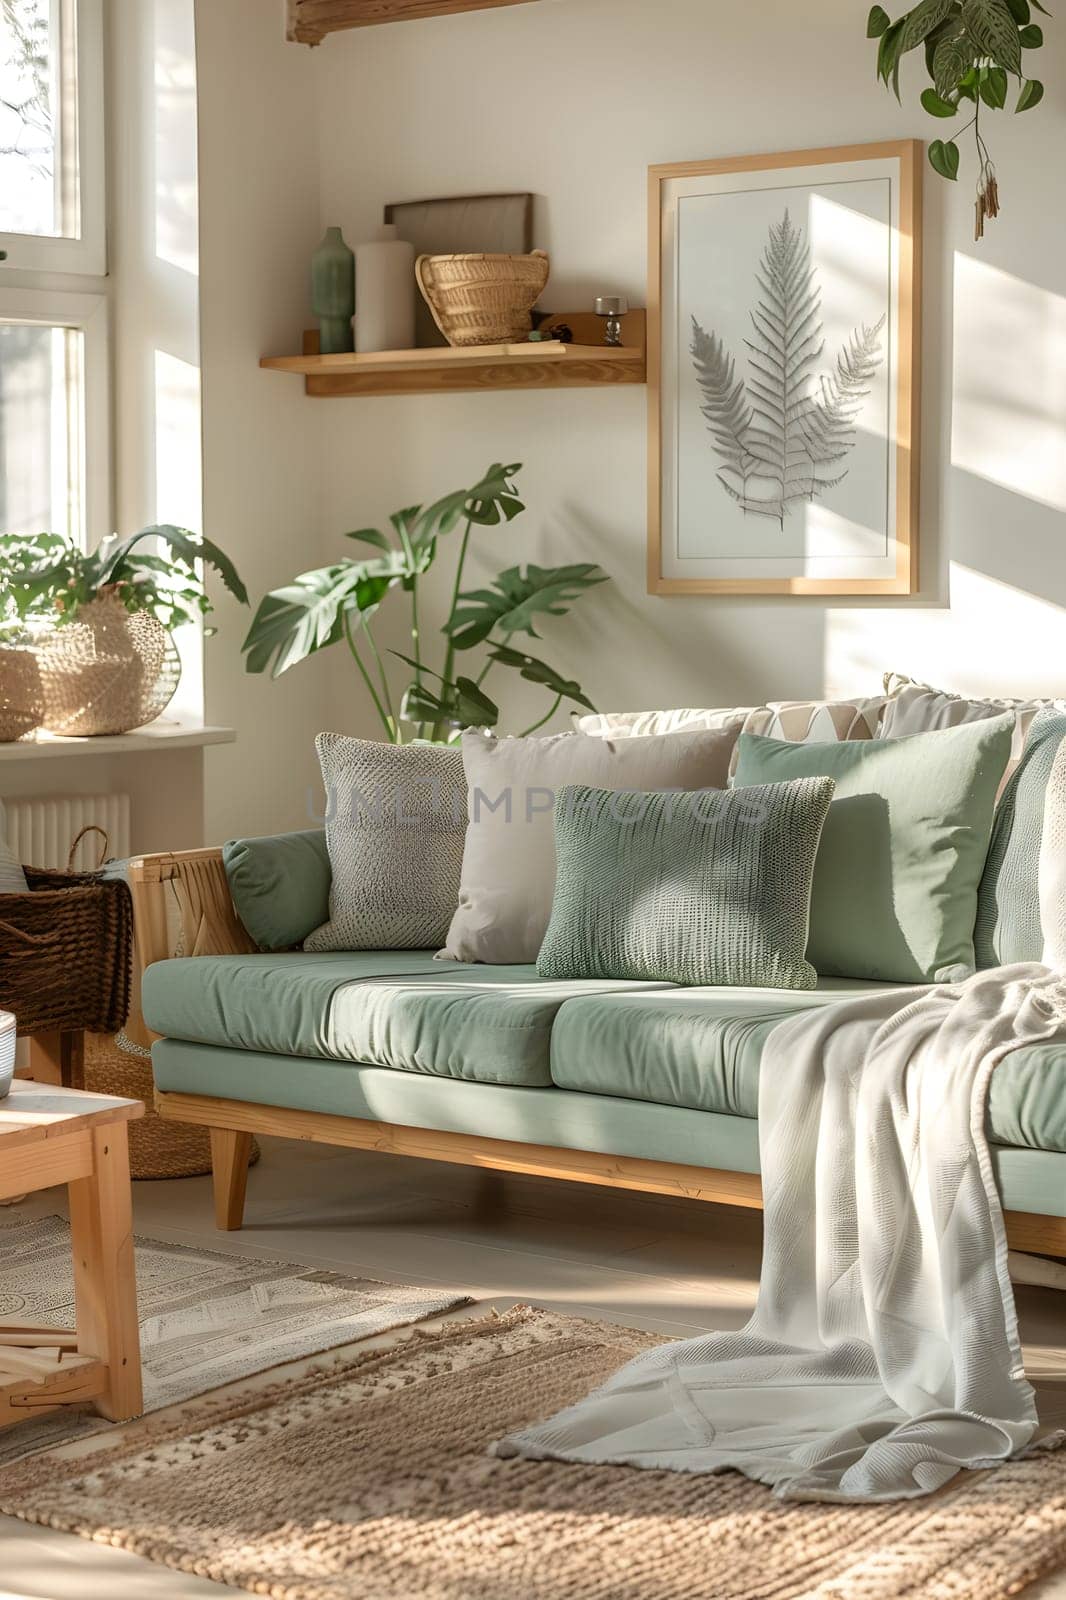 A cozy living room with a comfortable couch, wooden coffee table, and vibrant houseplants, creating a relaxing and inviting space in the house